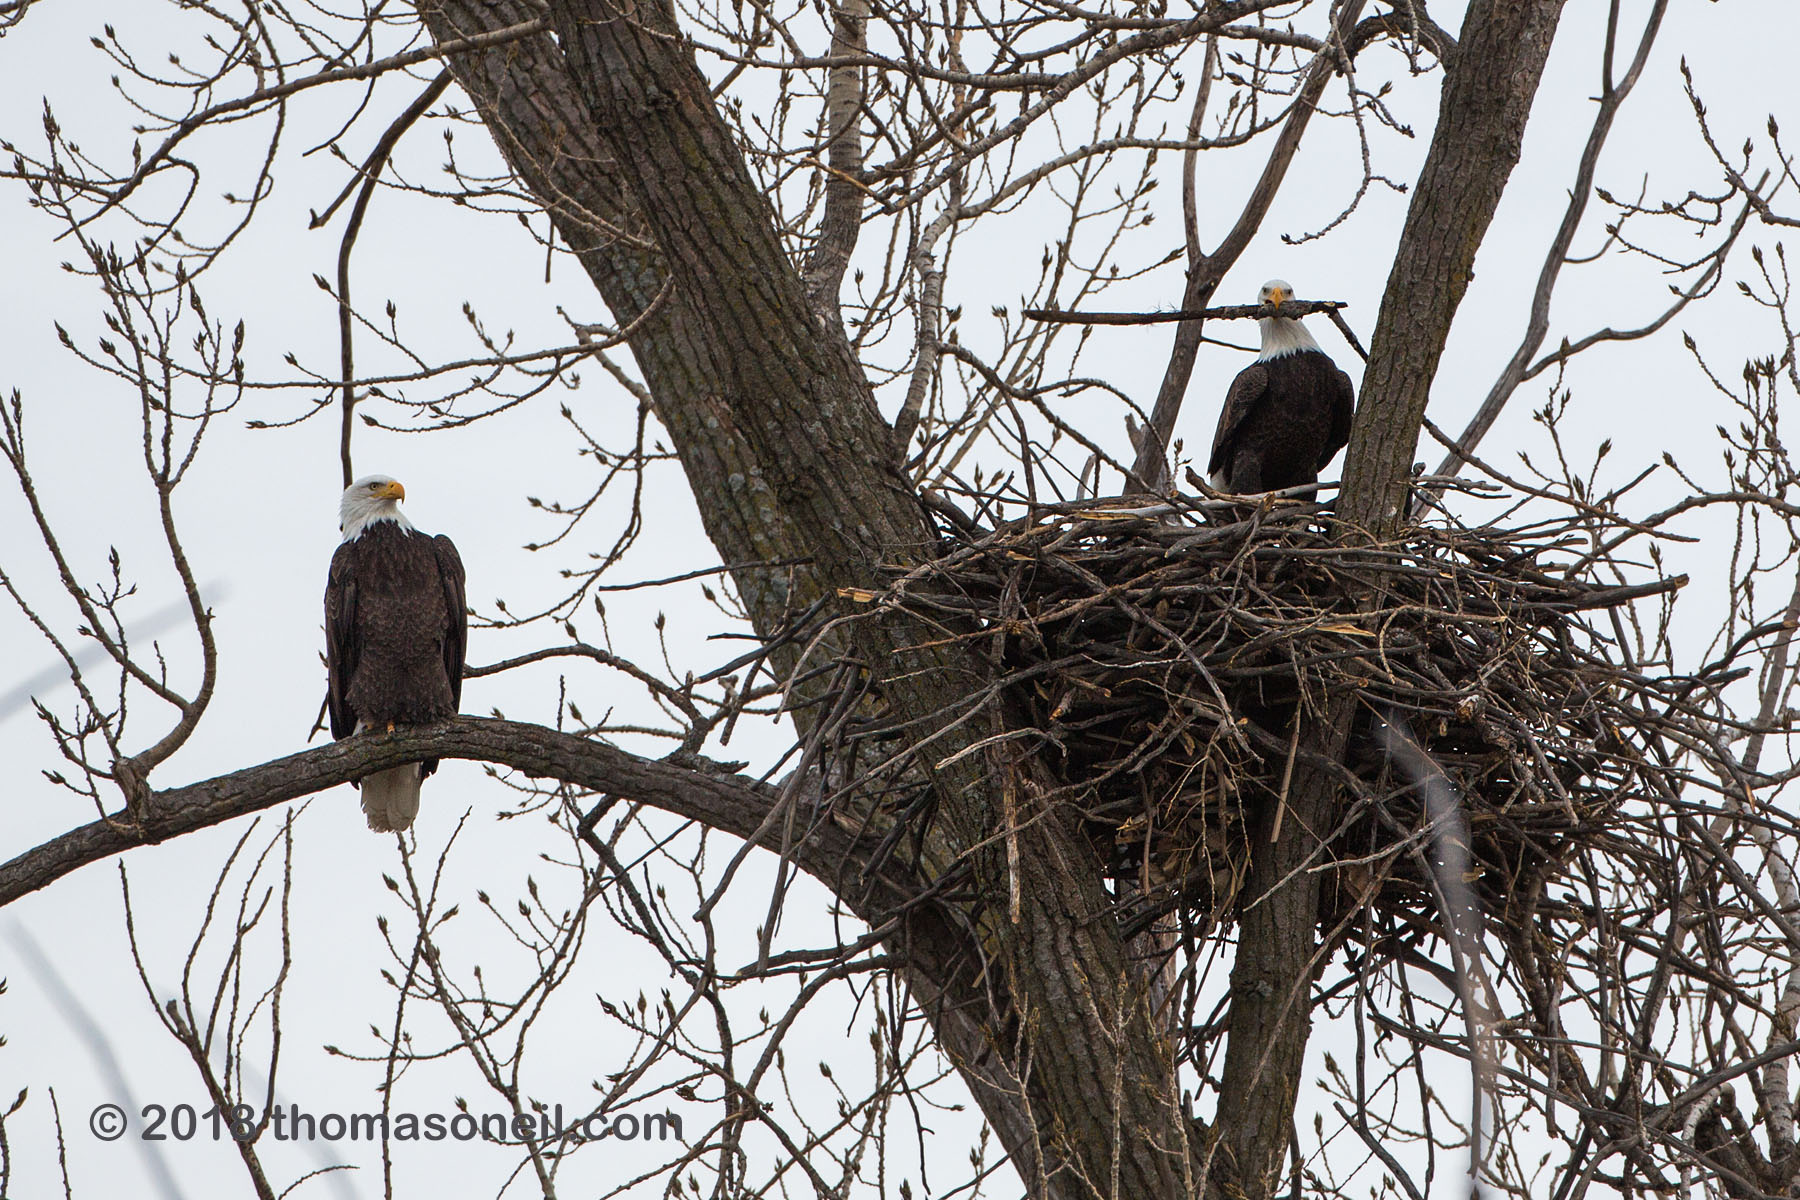 Bald eagles in nest, Loess Bluffs National Wildlife Refuge, Missouri.  Click for next photo.